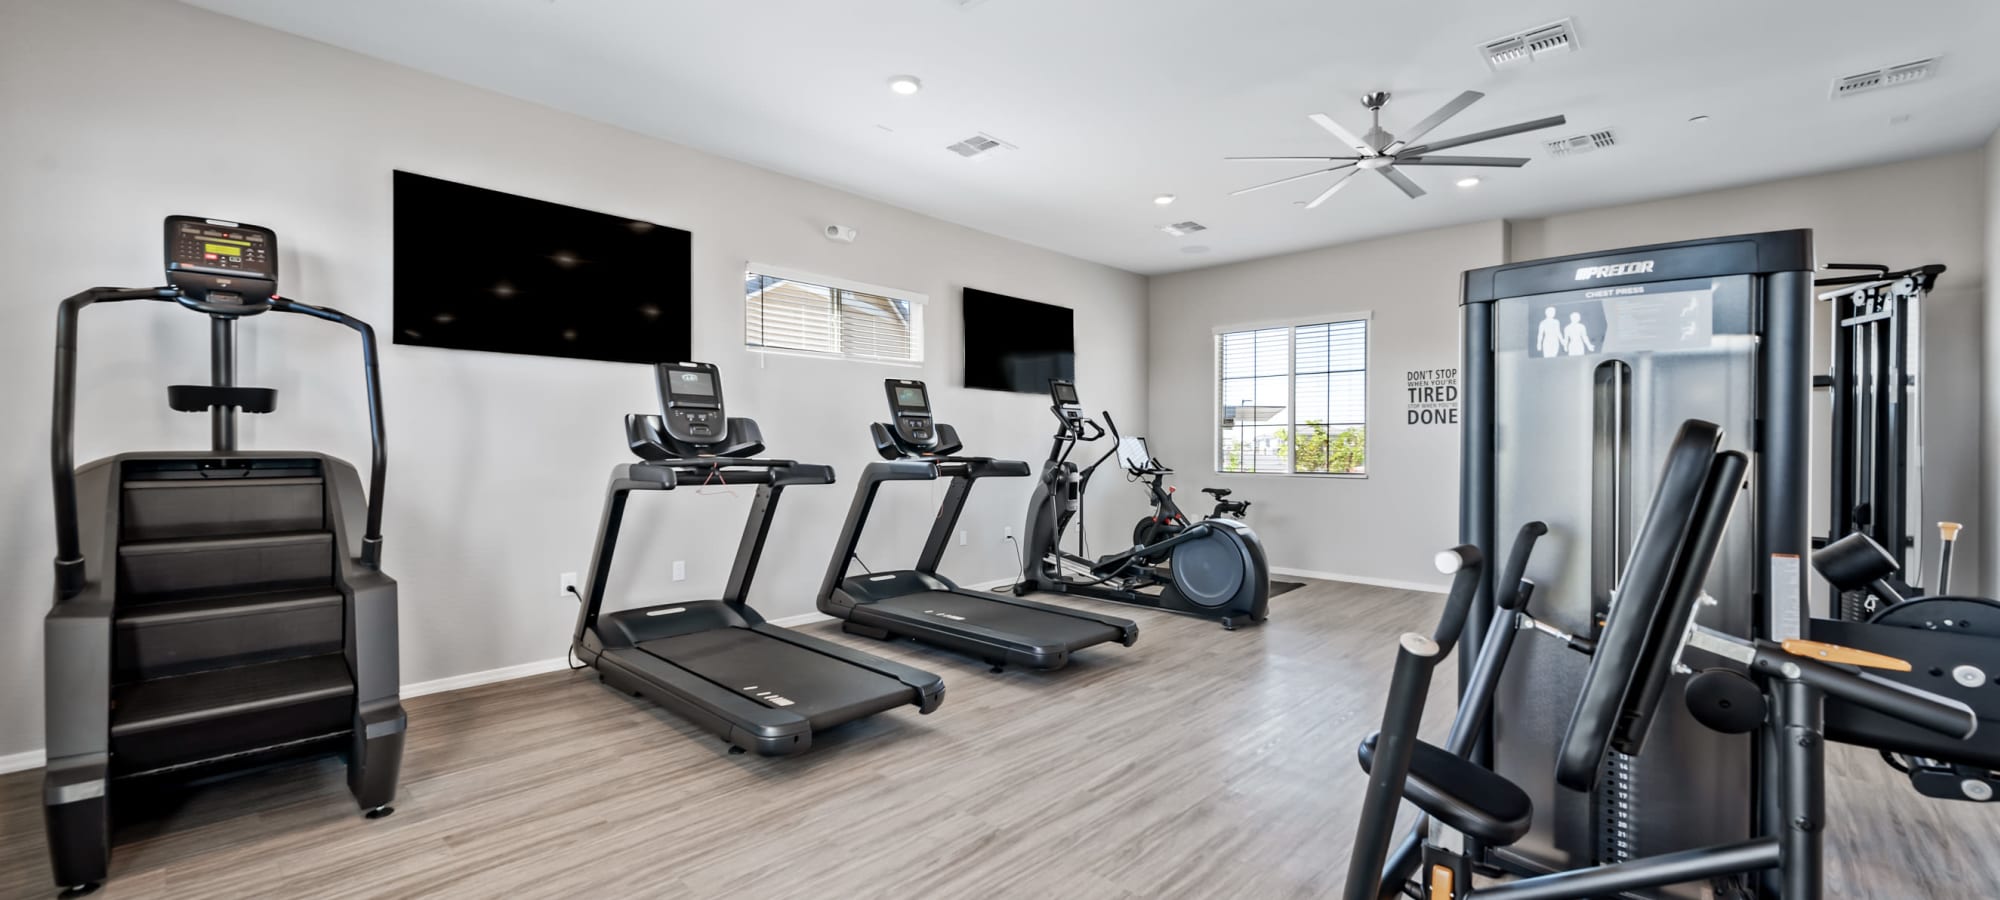 Fitness Center at Cottages at McDowell in Avondale, Arizona